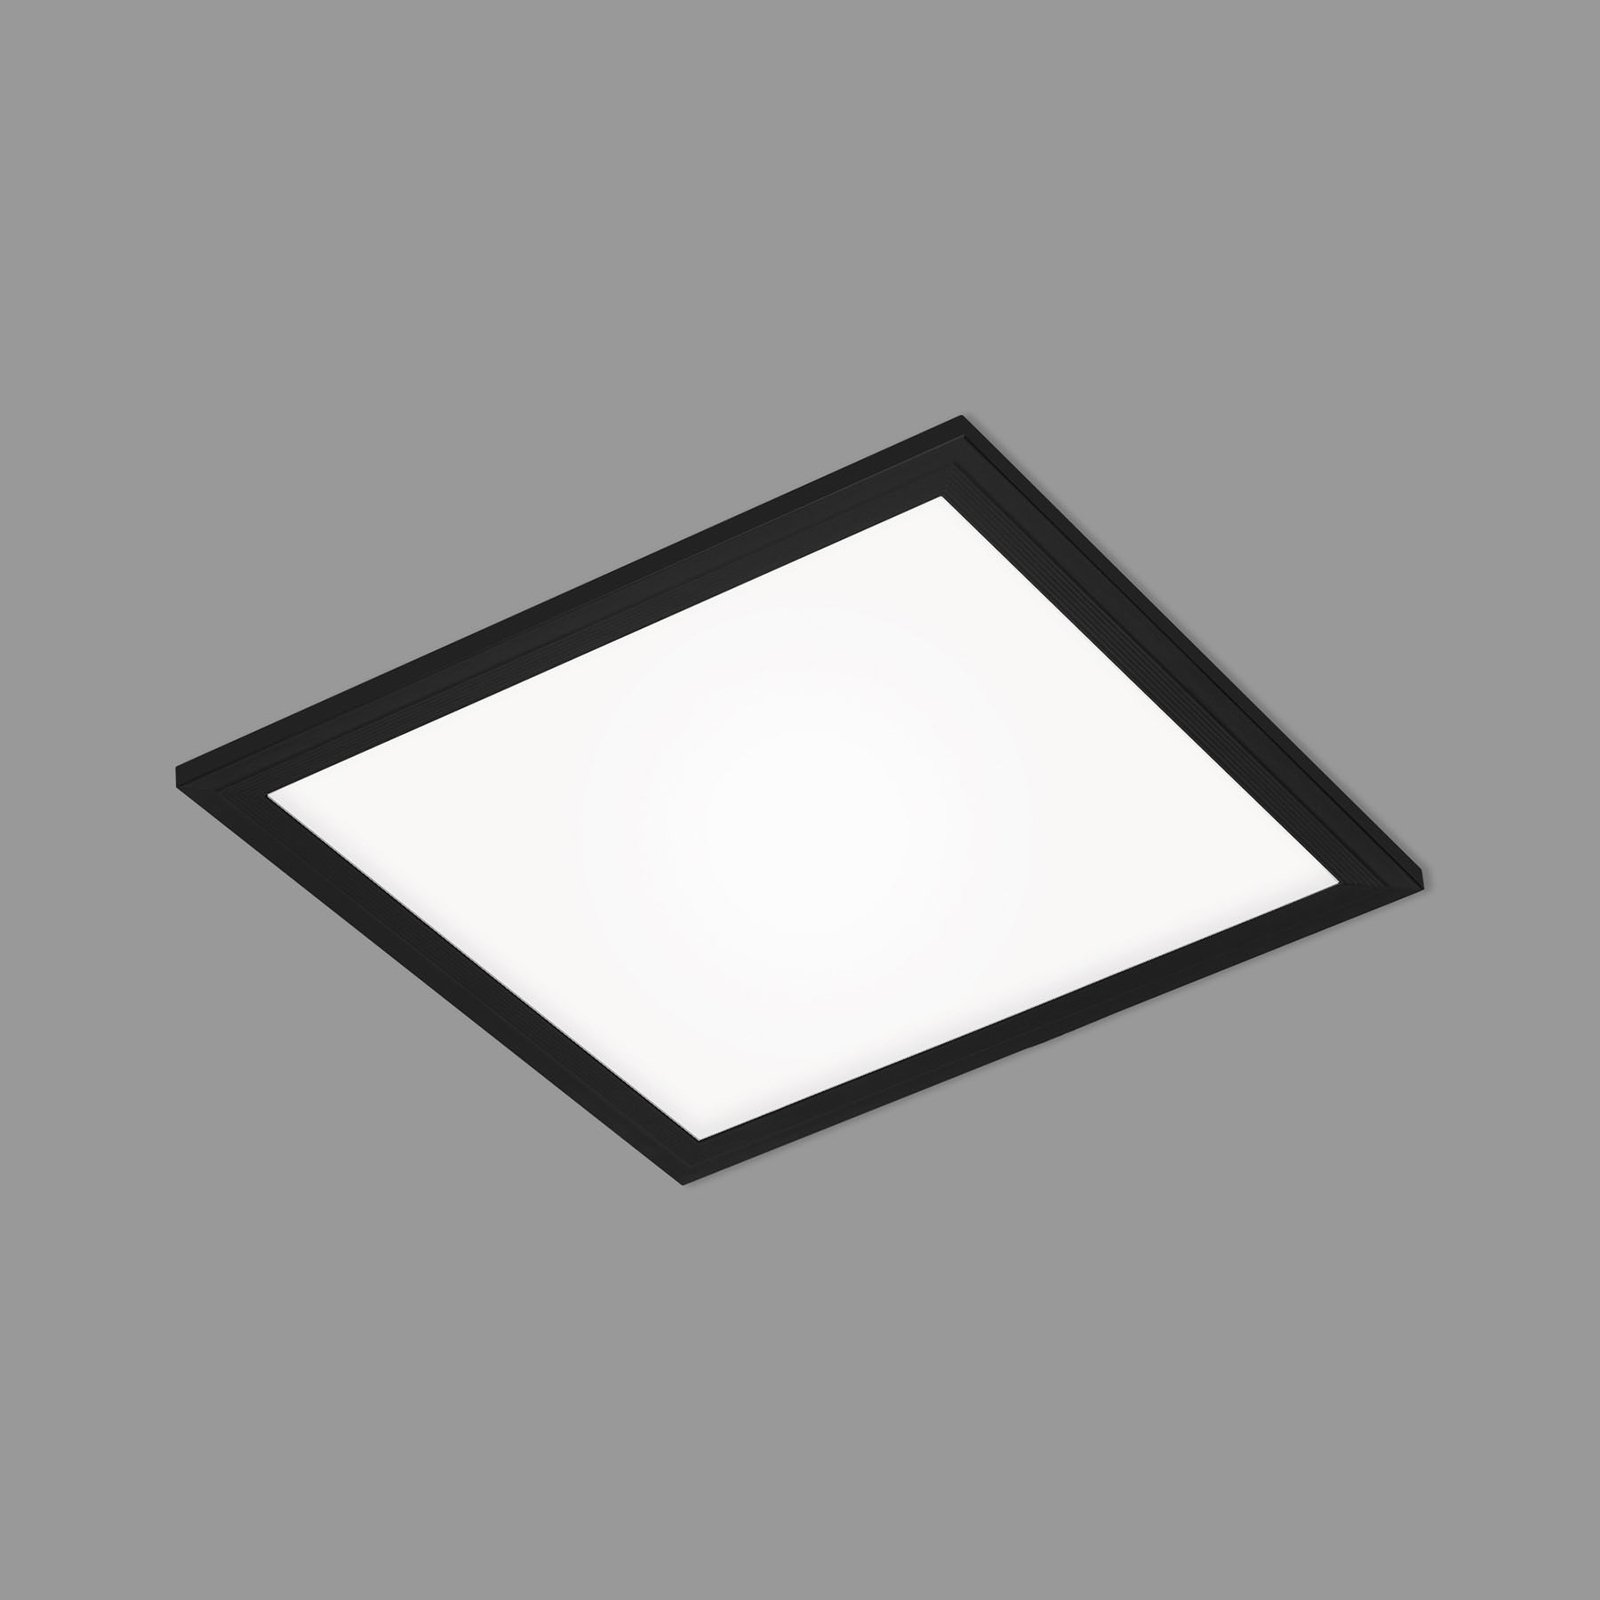 Painel LED Simples, preto, ultra-plano, 30x30cm